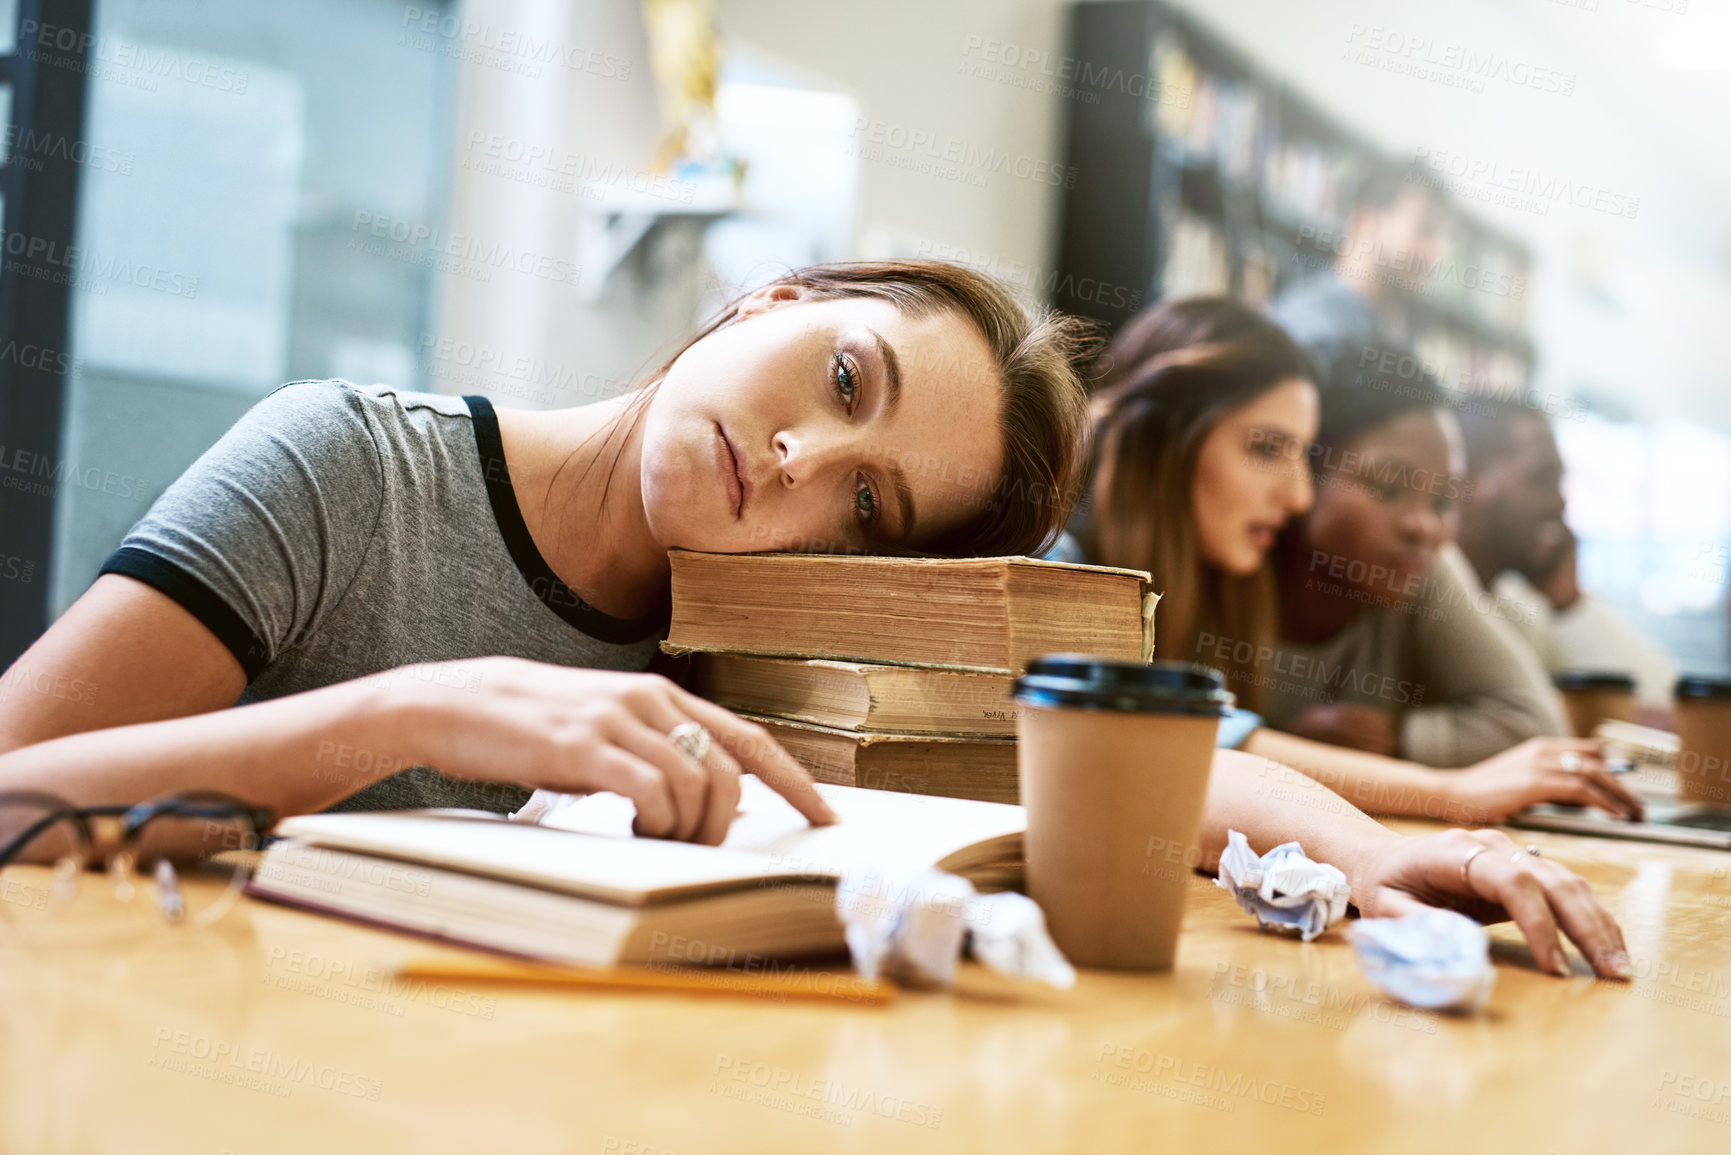 Buy stock photo Portrait of a young woman looking tired while studying in a college library